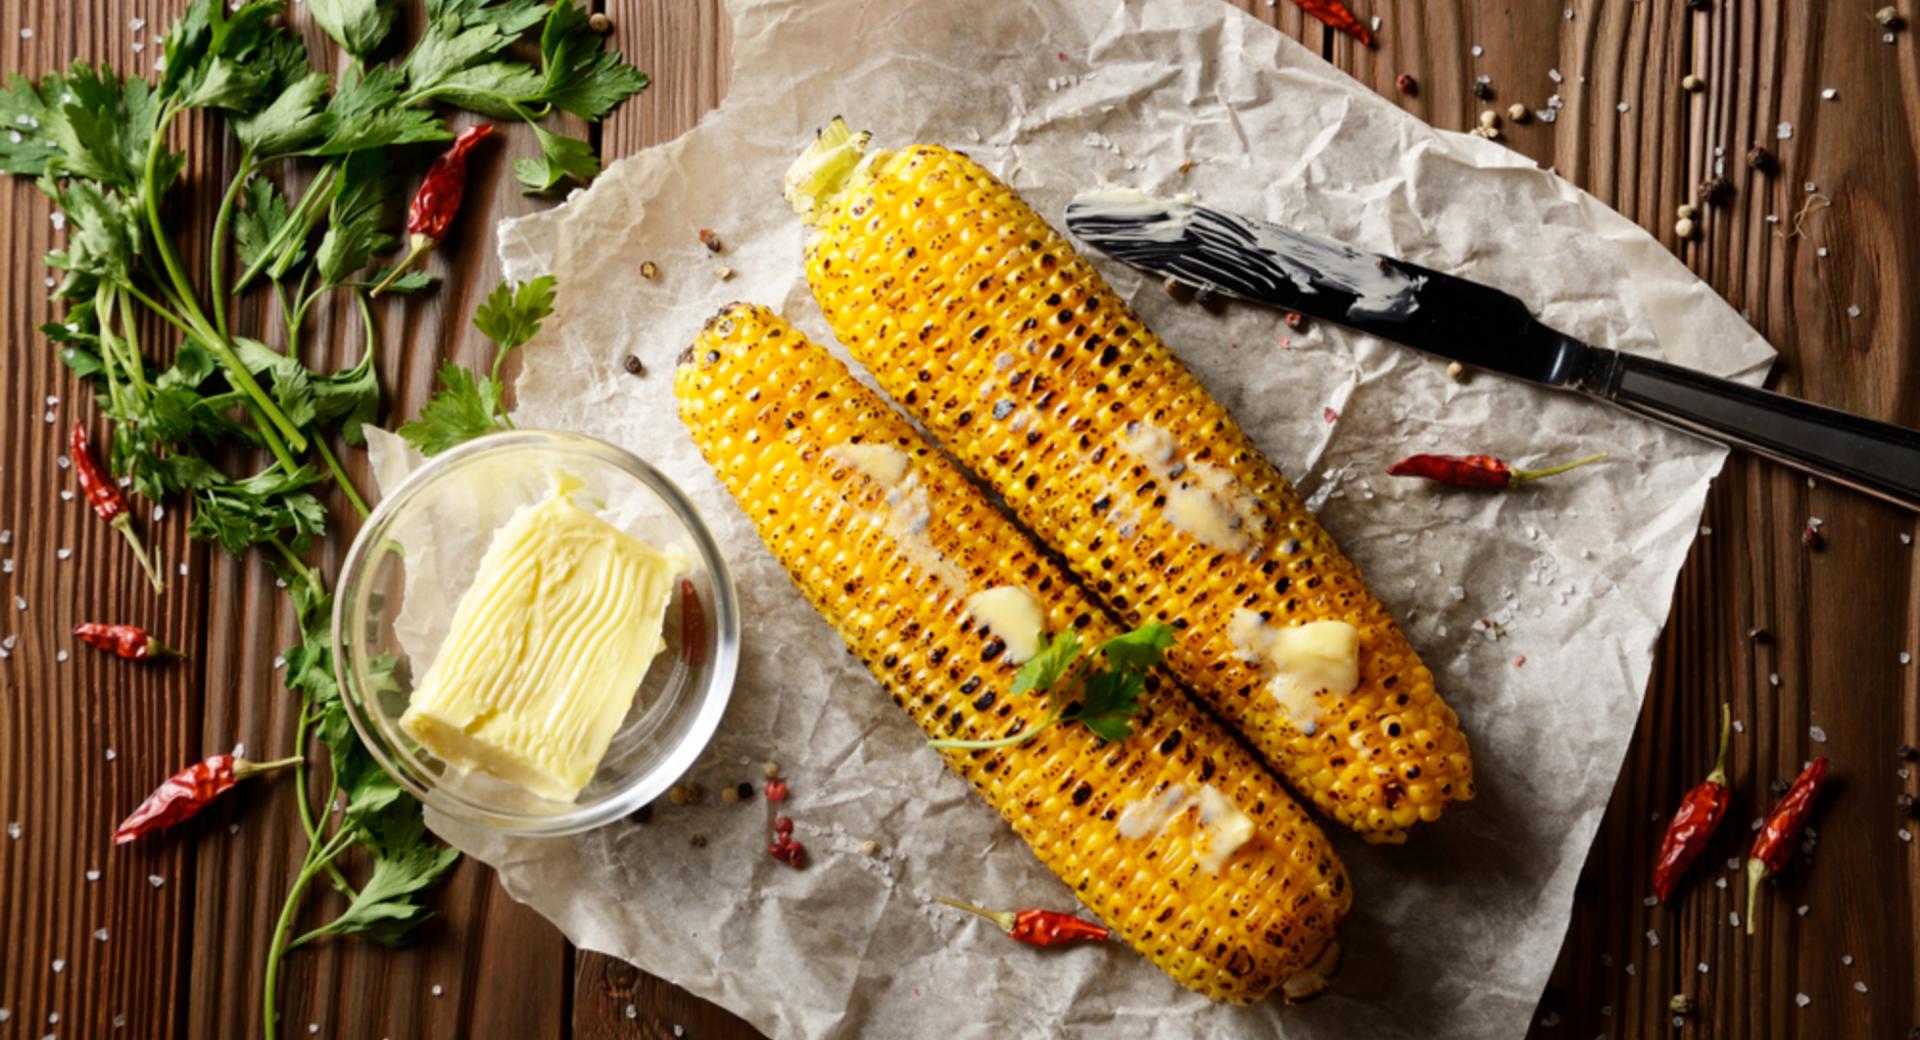 Corn on the cob with basil and pine-nut butter 